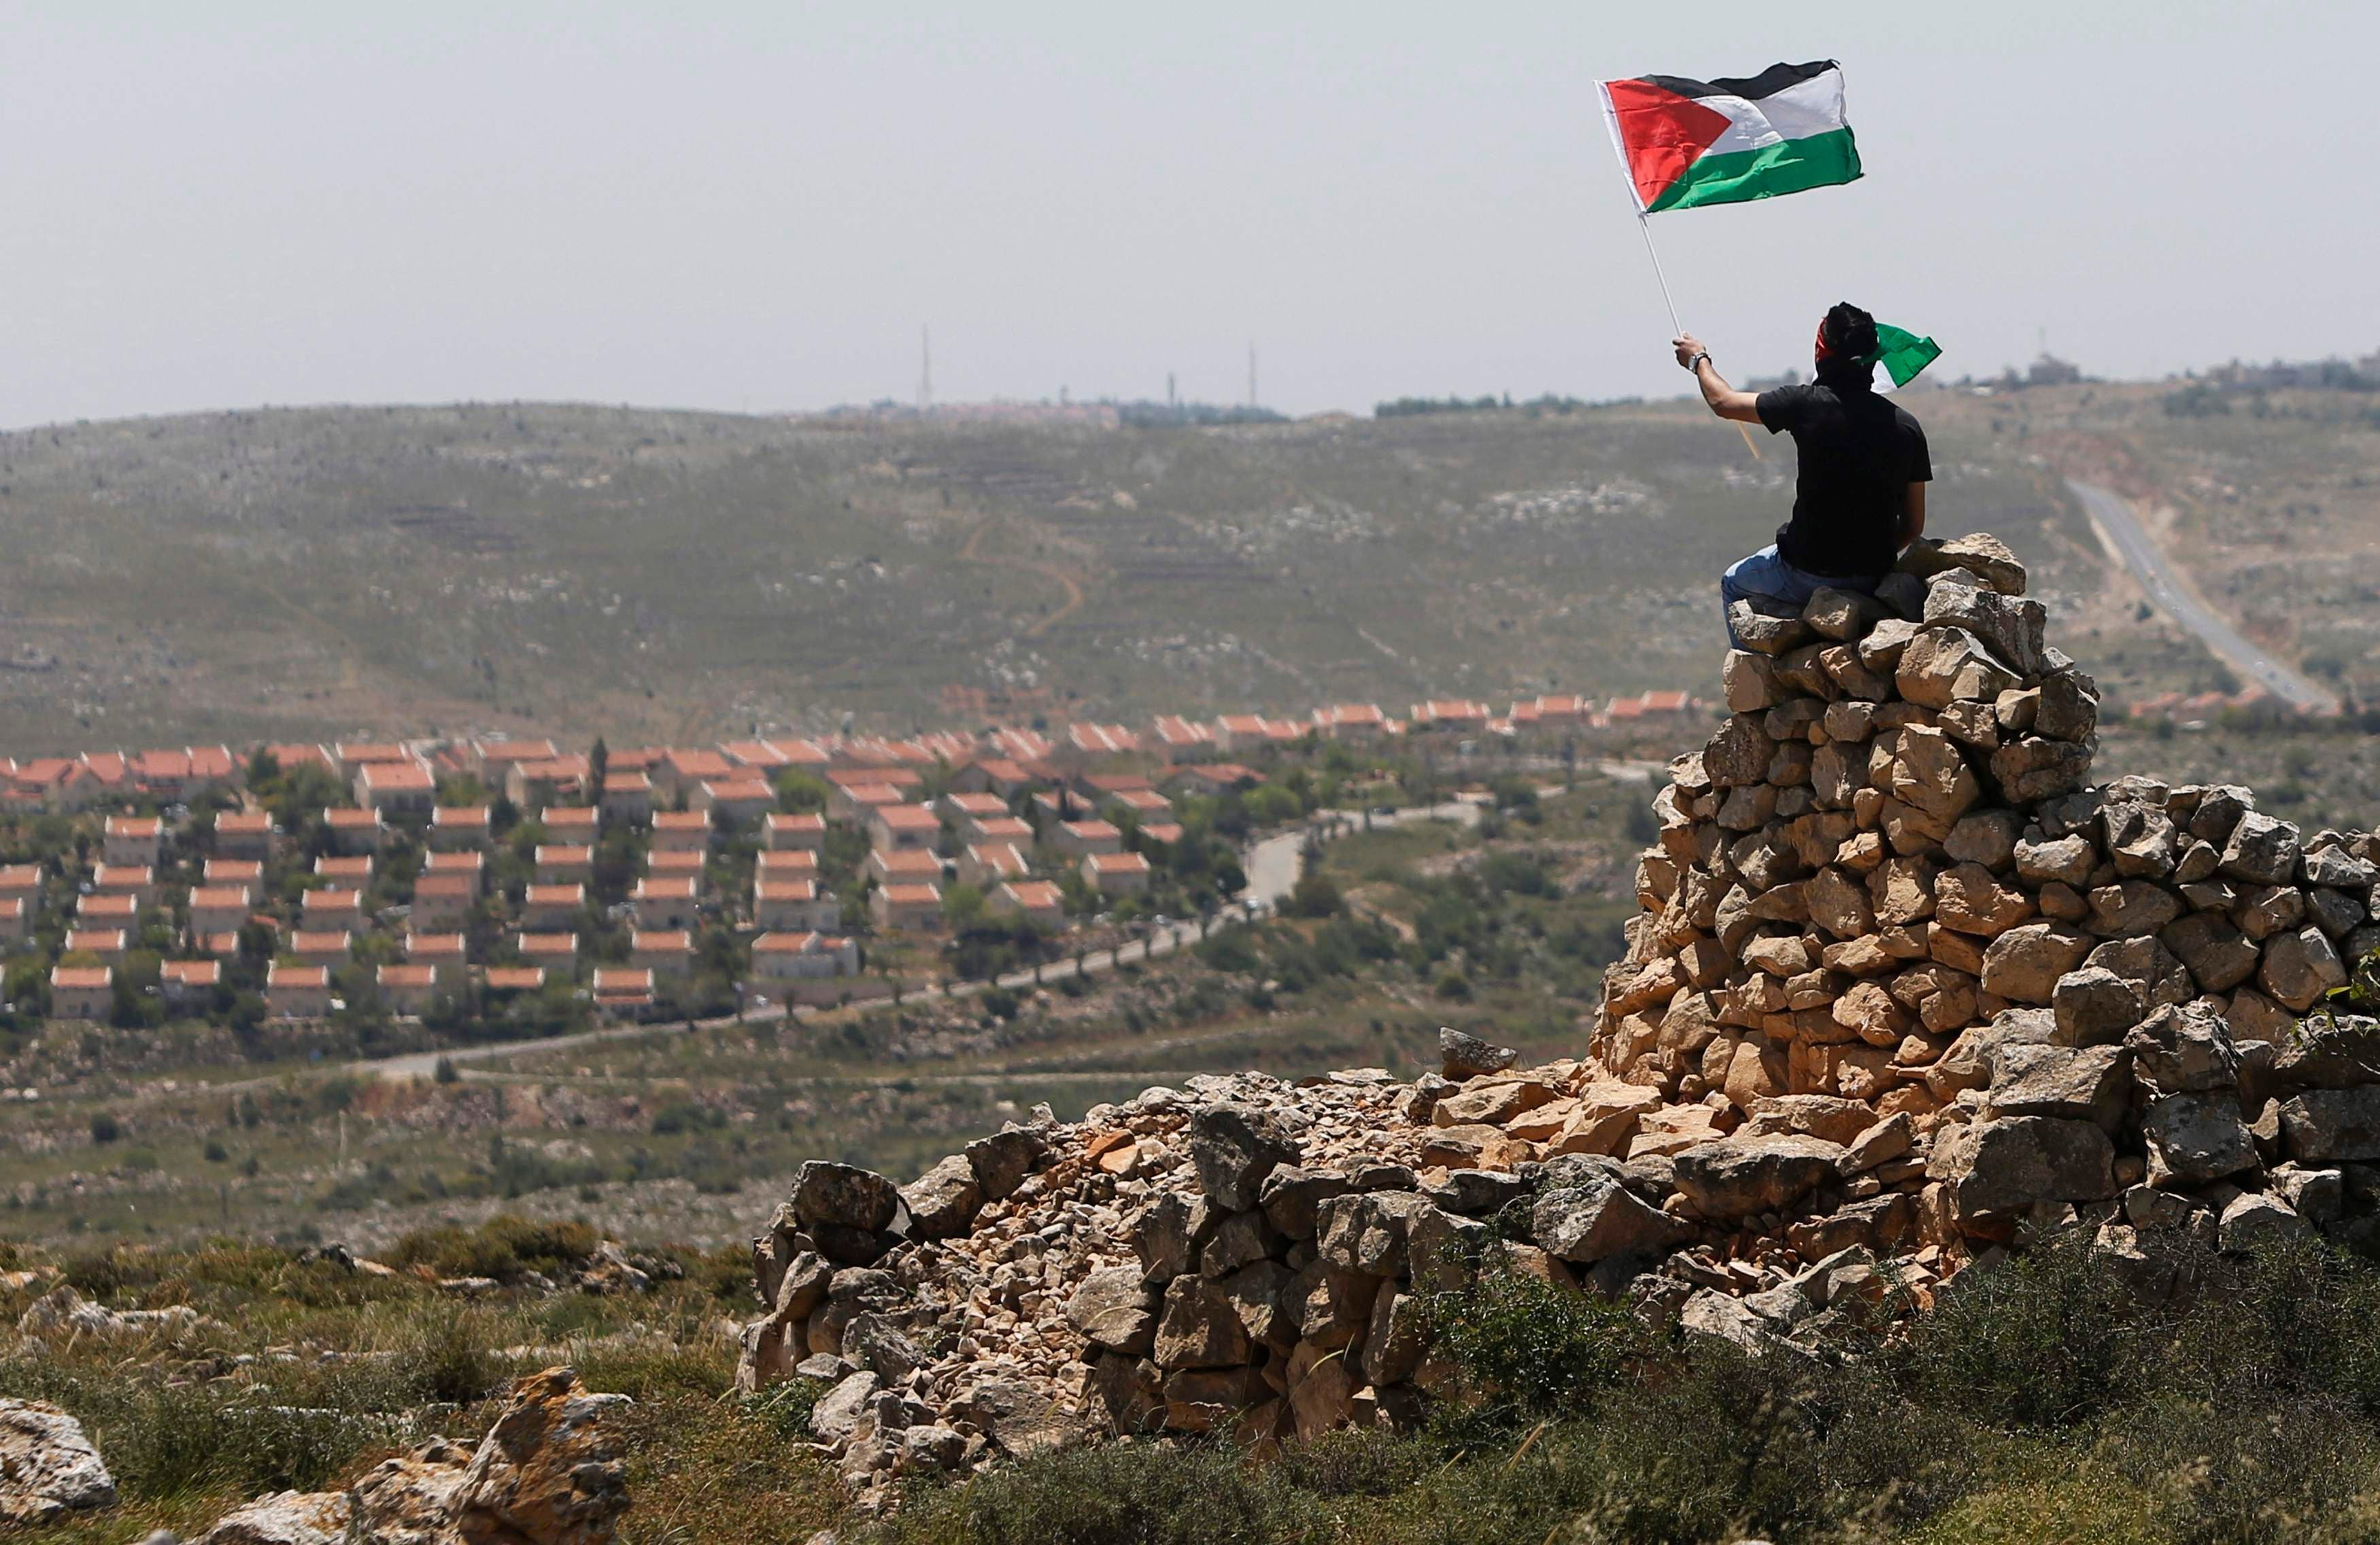 A protester waves a Palestinian flag in front of the Jewish settlement of Ofra during clashes near the West Bank village of Deir Jarir near Ramallah April 26, 2013. (Reuters)